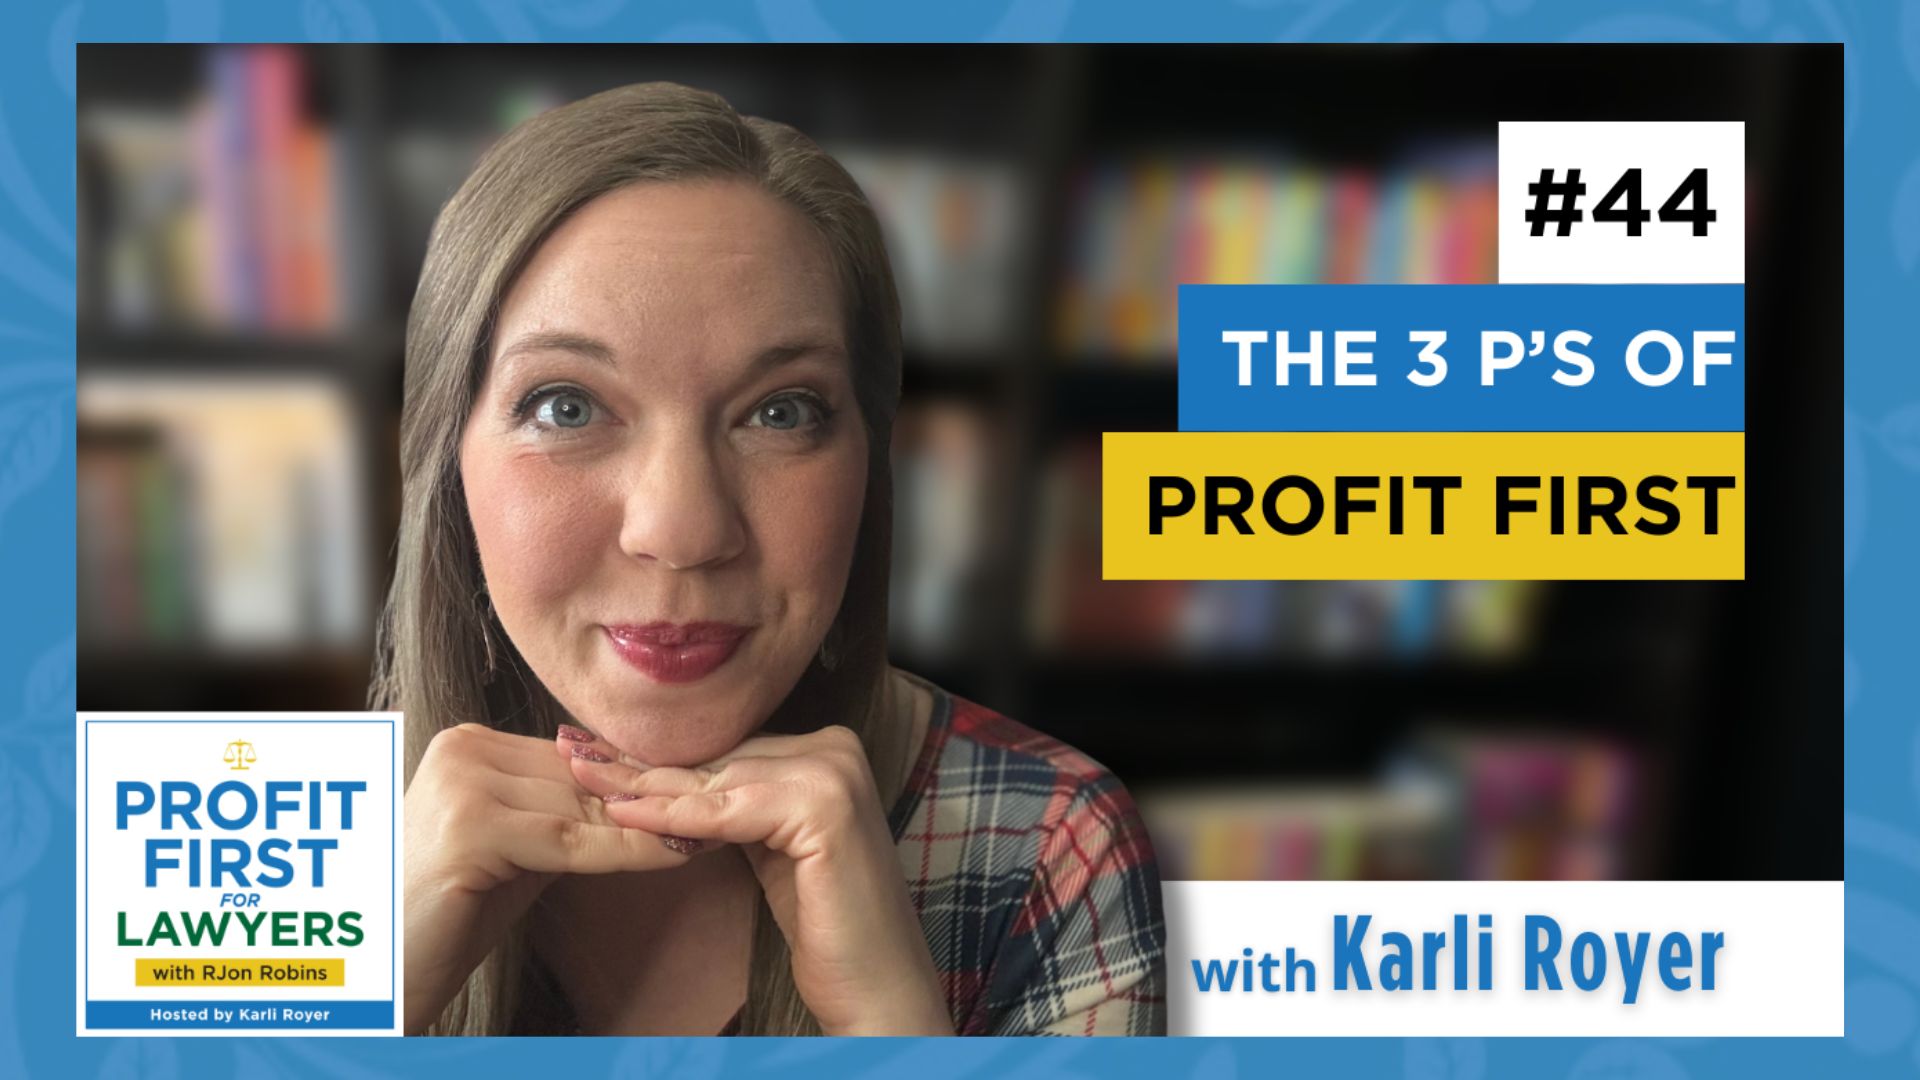 featured image of Karli Royer, host of Profit First For Lawyers podcast smiling with her chin on the top of her hands. Text "#44 The 3 P's of Profit First"